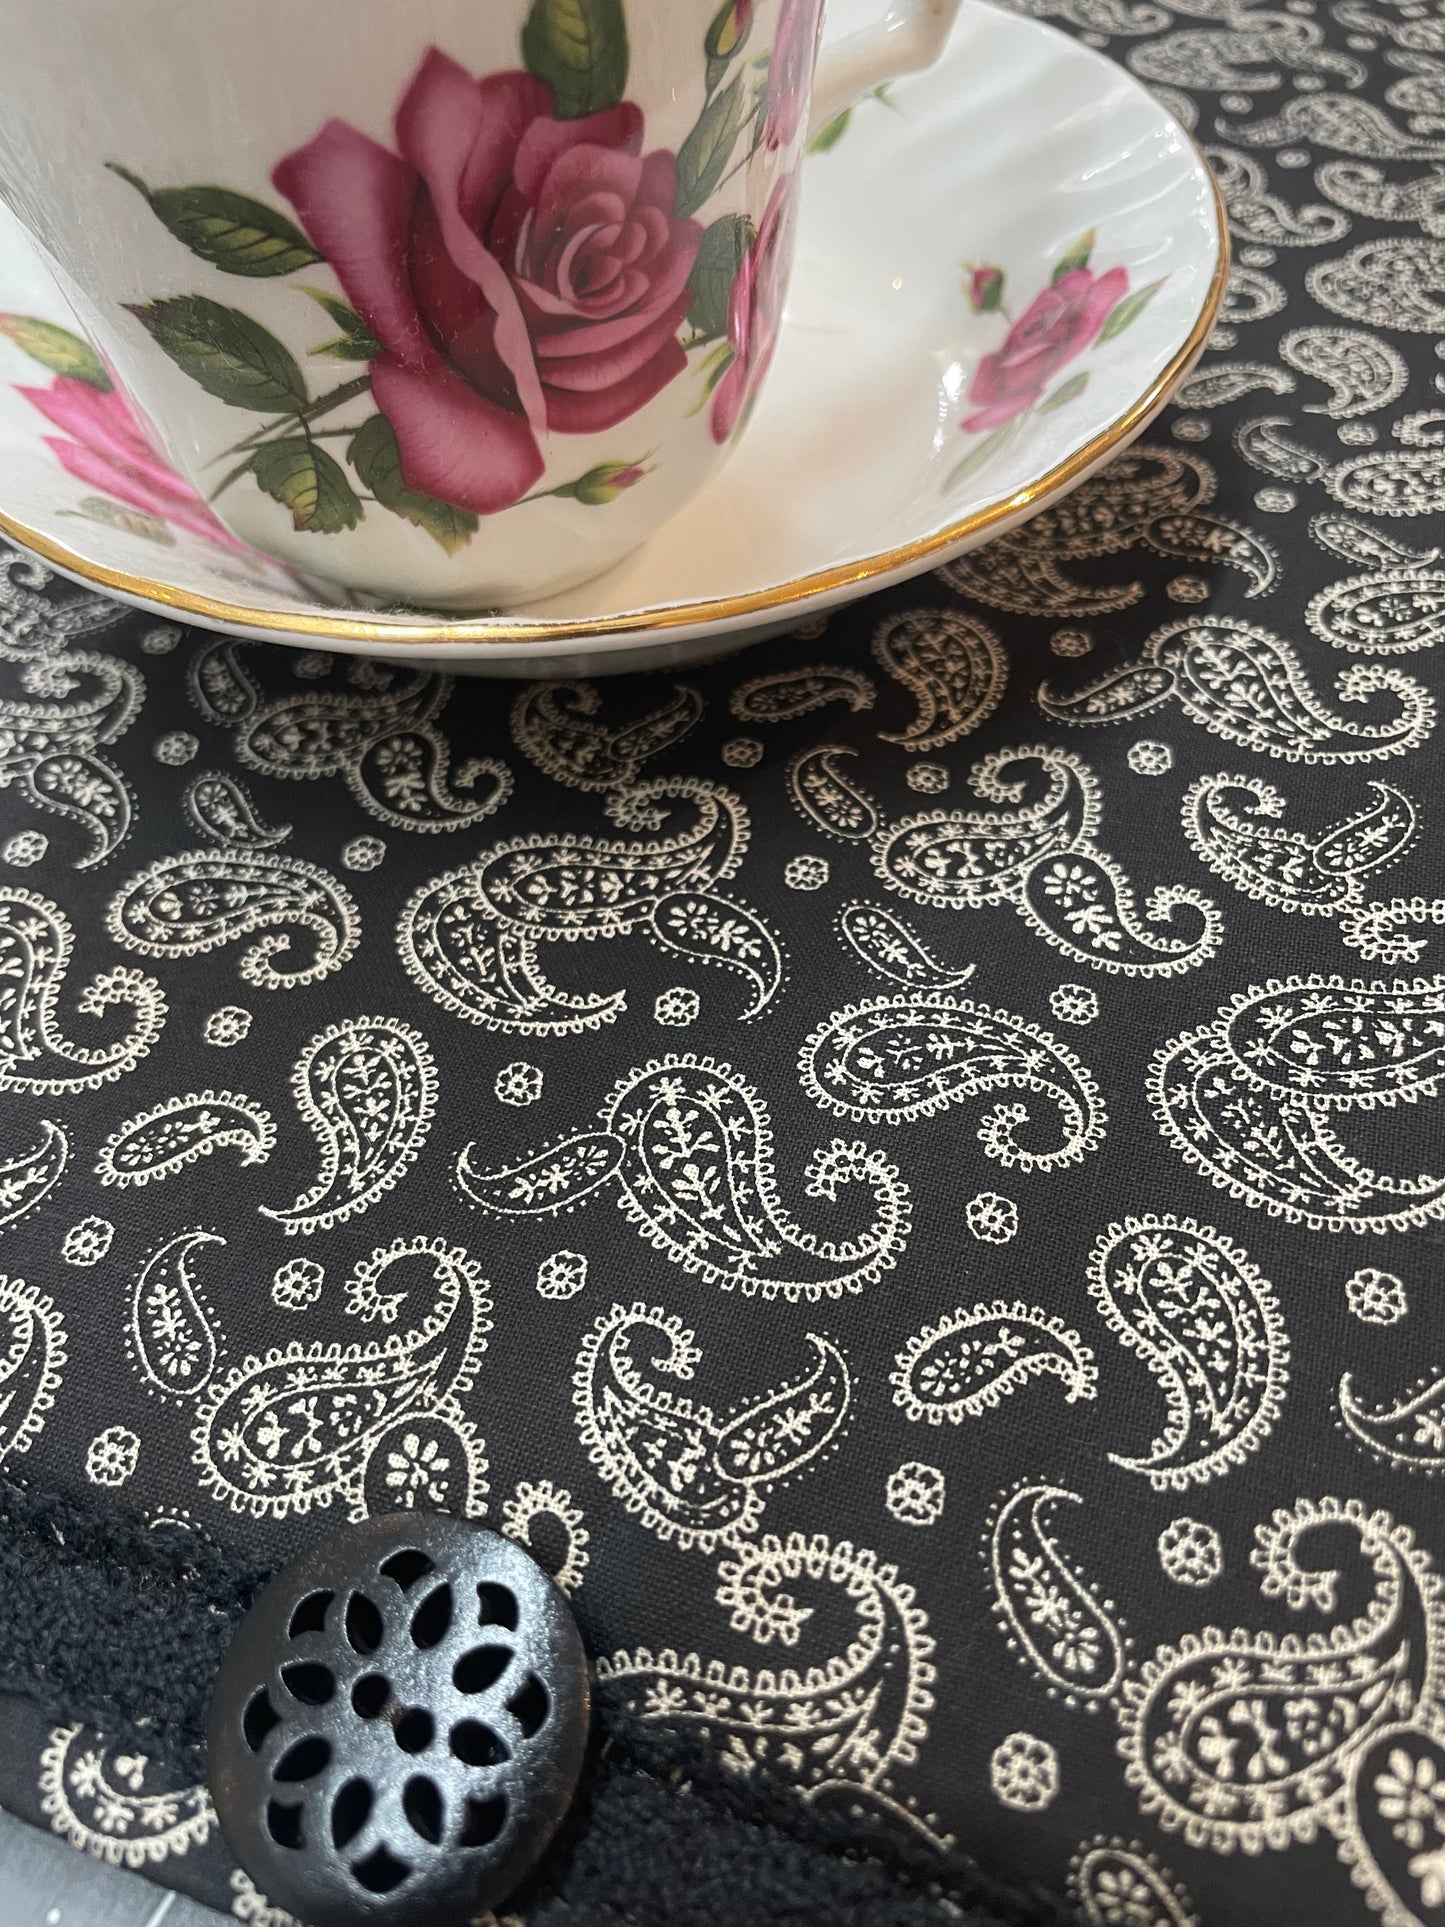 Handmade Modern Farmhouse Kitchen Dish Drying Mat - Black and Cream Paisley Print with Lace Trim